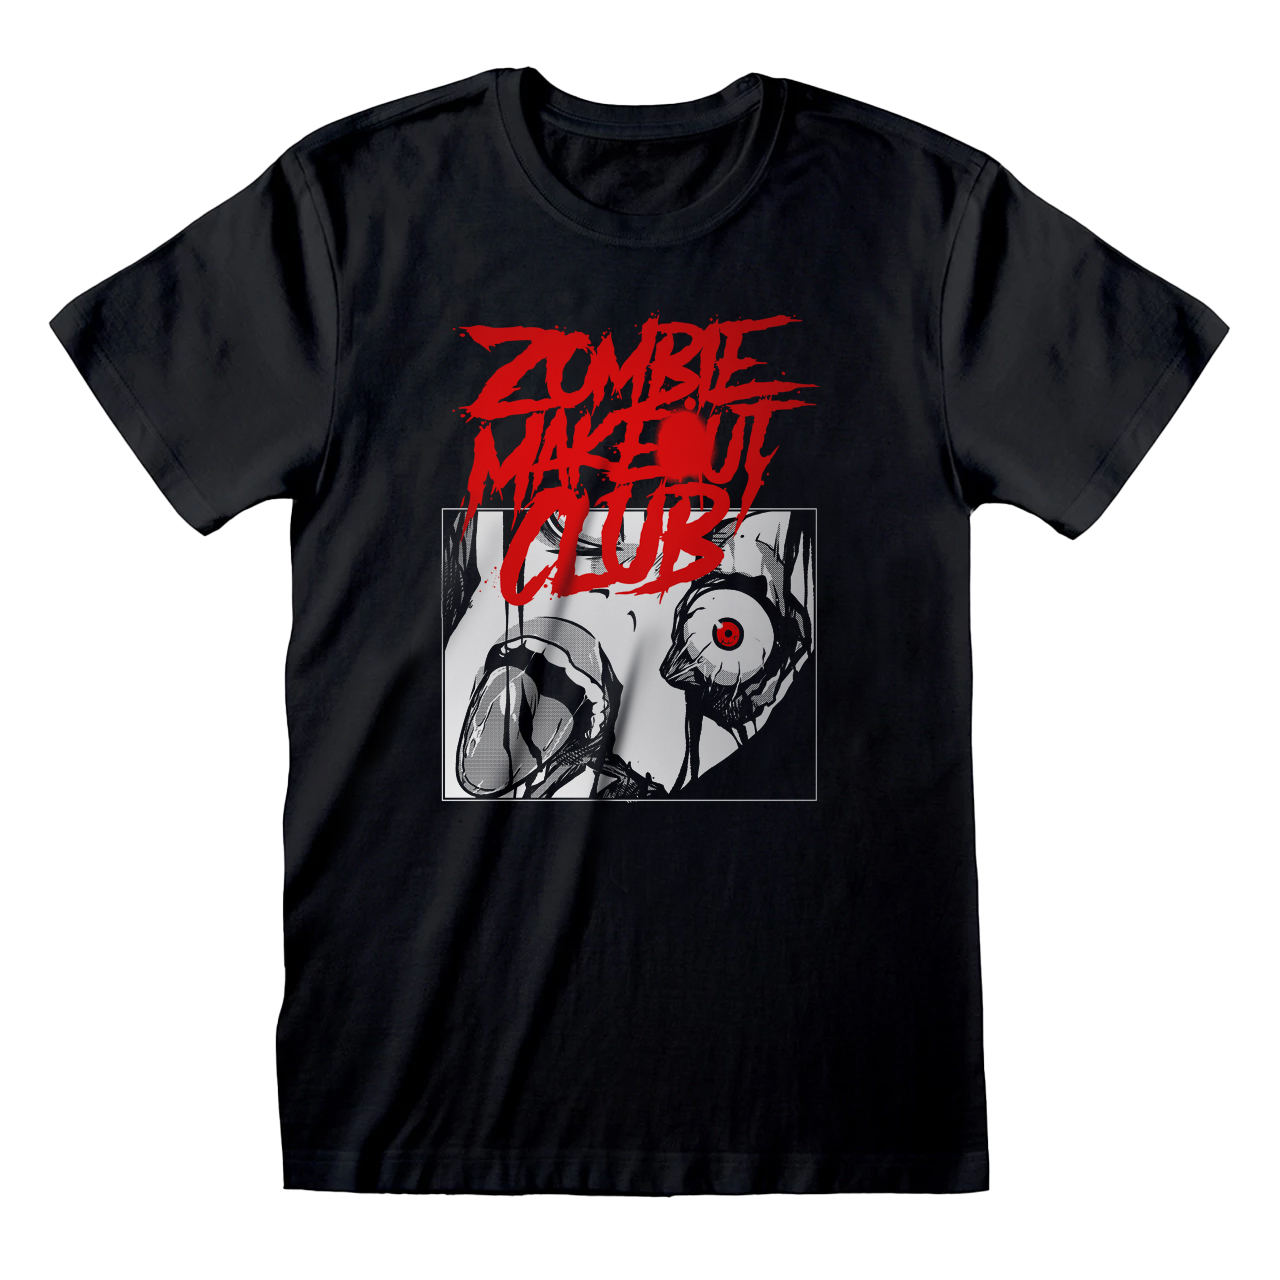 Zombie Makeout Club 'Red Eye' Black Adult T-Shirts